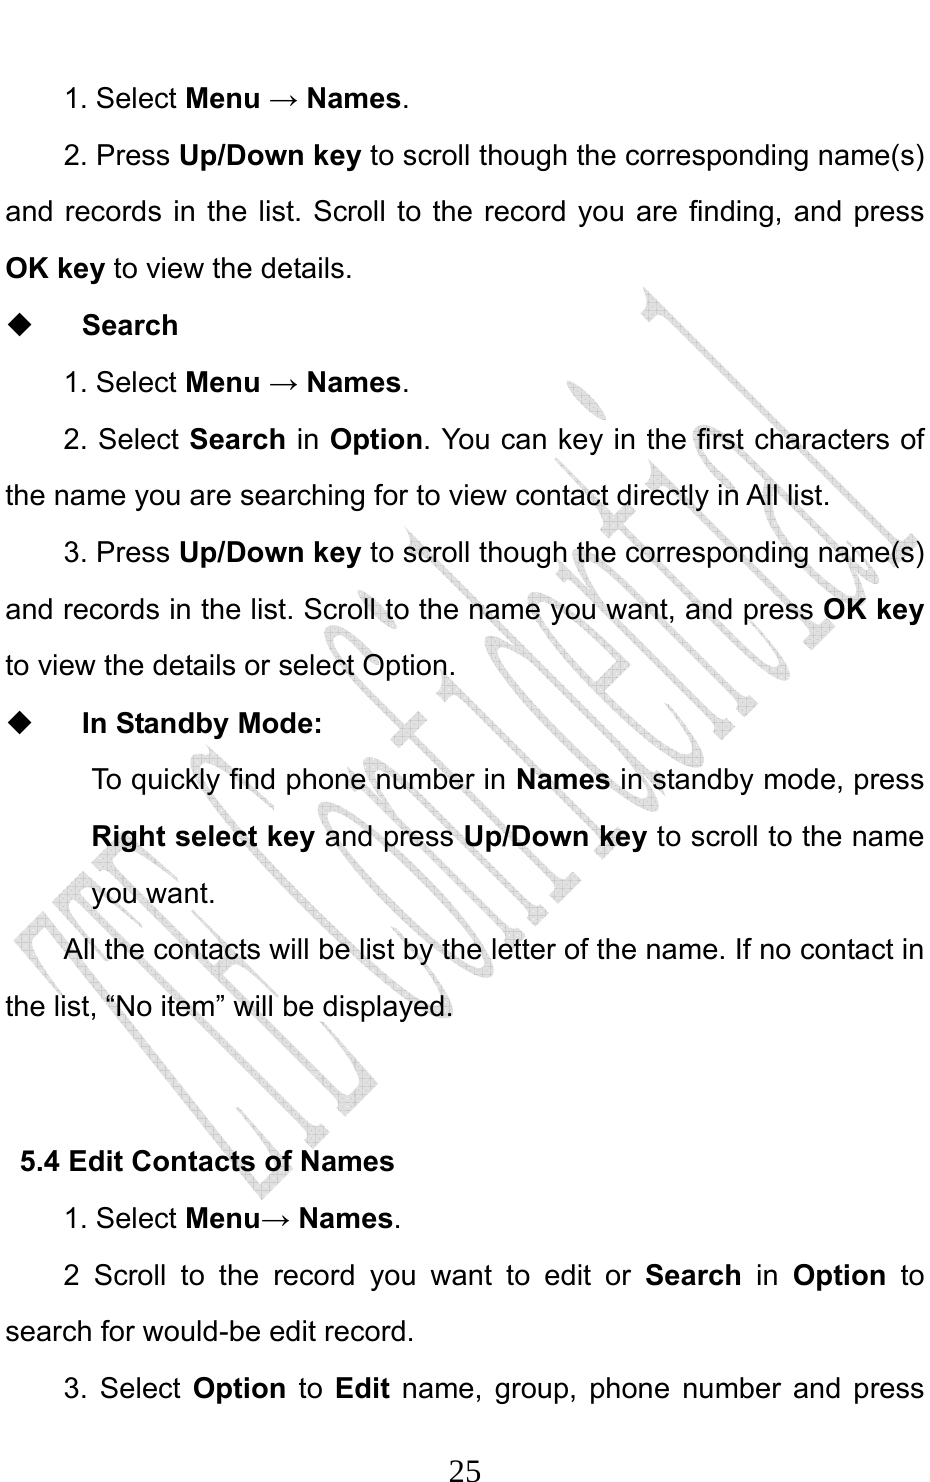                              251. Select Menu → Names.  2. Press Up/Down key to scroll though the corresponding name(s) and records in the list. Scroll to the record you are finding, and press OK key to view the details.  Search 1. Select Menu → Names. 2. Select Search in Option. You can key in the first characters of the name you are searching for to view contact directly in All list.   3. Press Up/Down key to scroll though the corresponding name(s) and records in the list. Scroll to the name you want, and press OK key to view the details or select Option.    In Standby Mode:   To quickly find phone number in Names in standby mode, press Right select key and press Up/Down key to scroll to the name you want.   All the contacts will be list by the letter of the name. If no contact in the list, “No item” will be displayed.  5.4 Edit Contacts of Names 1. Select Menu→ Names. 2 Scroll to the record you want to edit or Search in Option to search for would-be edit record. 3. Select Option to  Edit name, group, phone number and press 